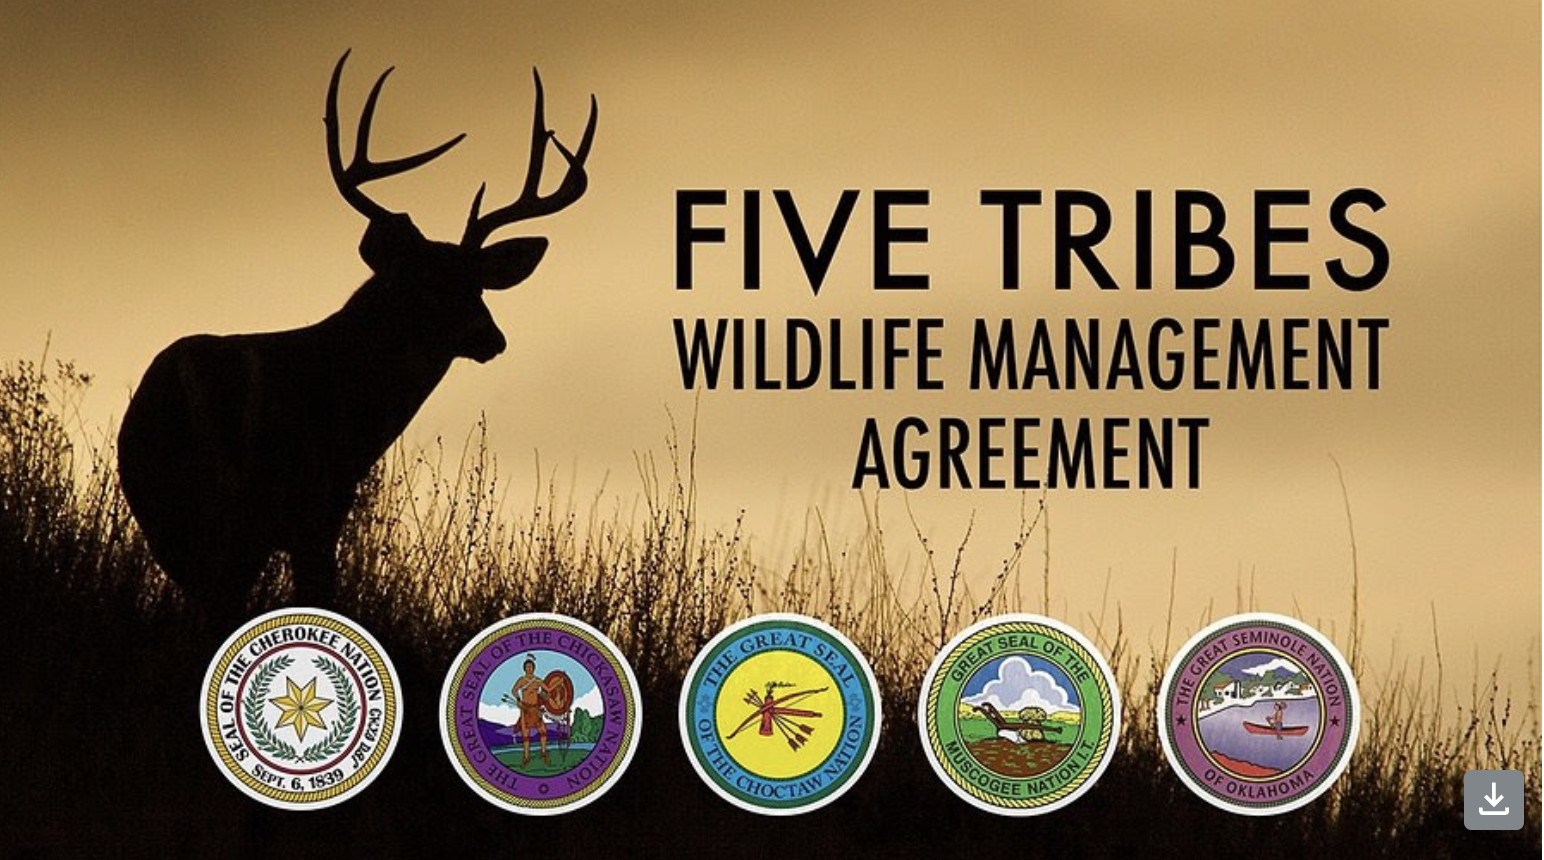 Tribal Agreement Allows Hunting and Fishing Across Reservations